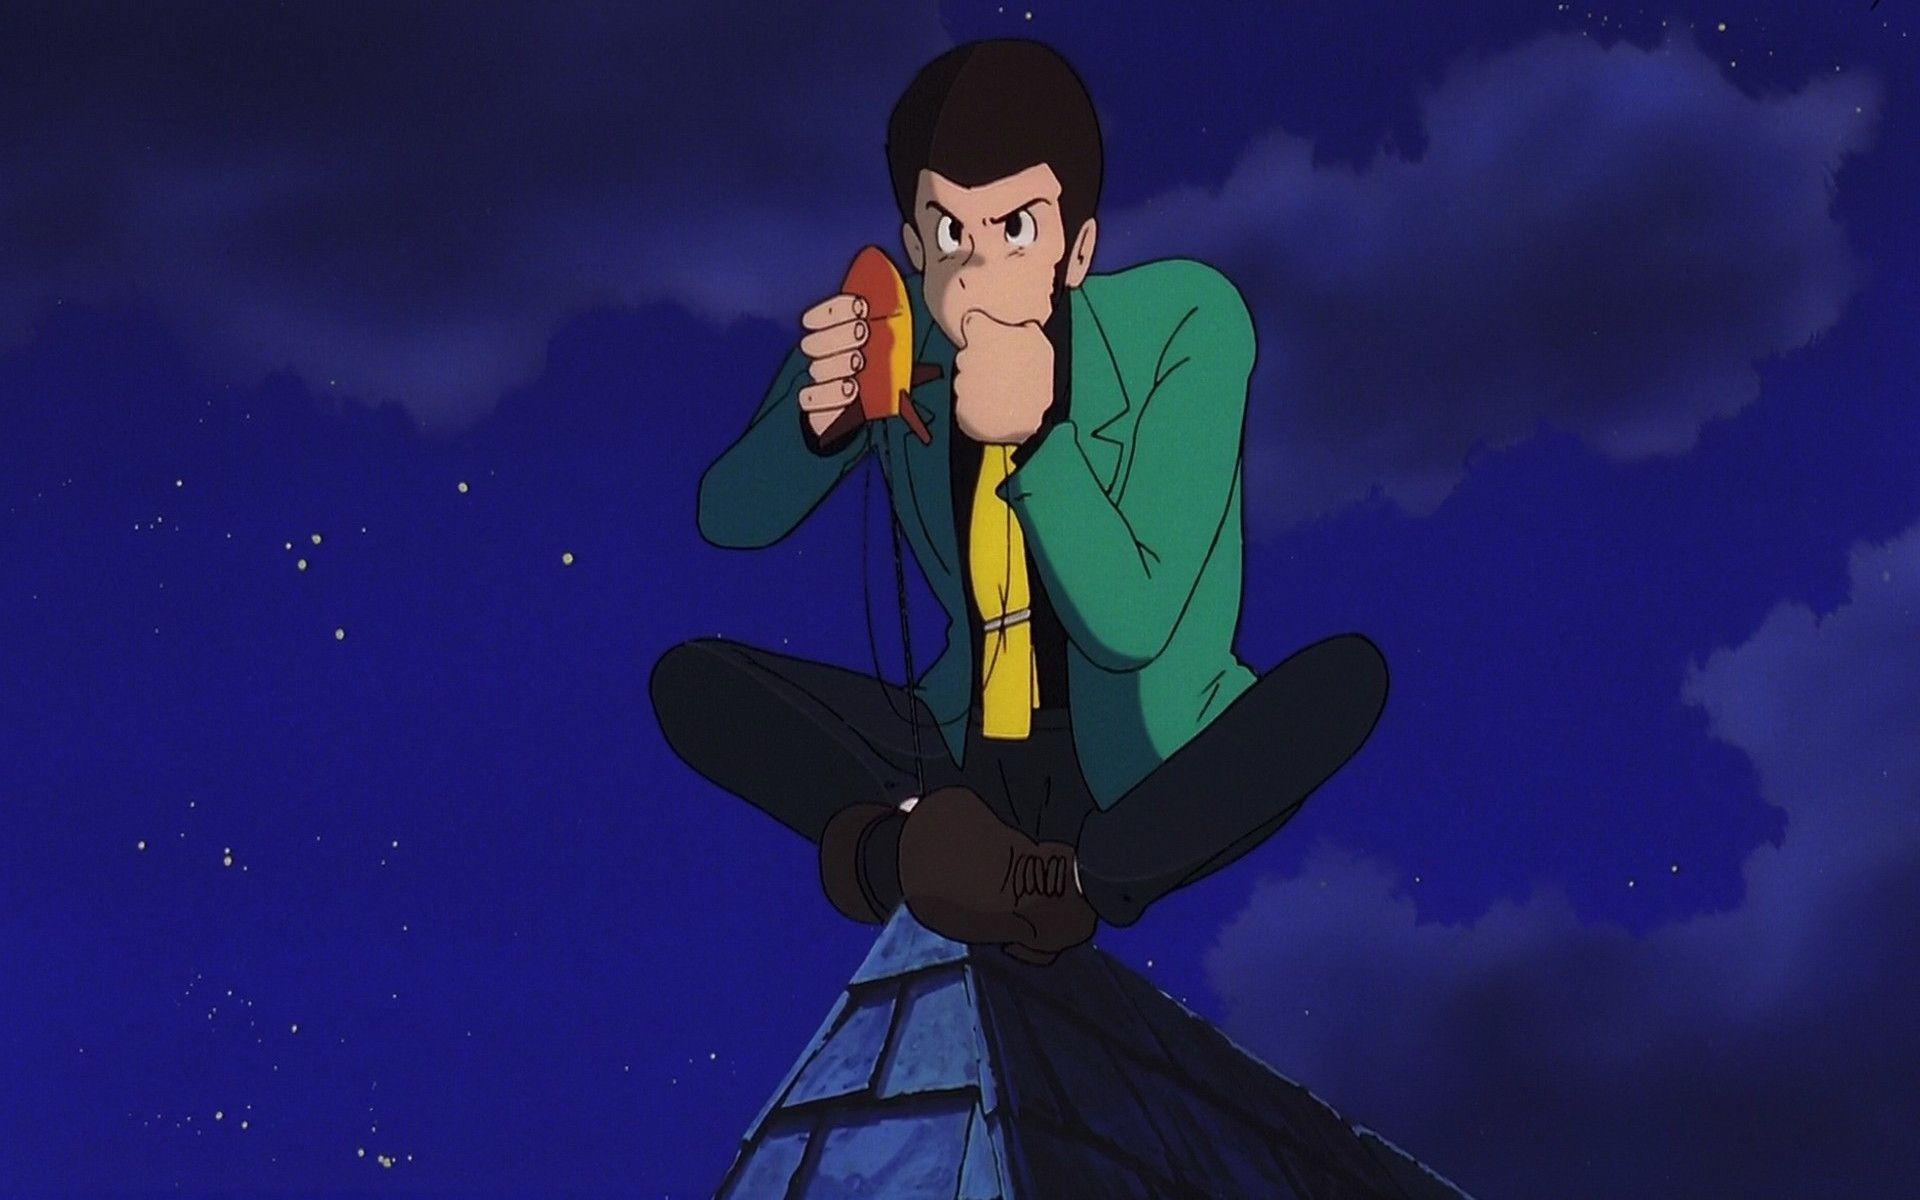 Lupin The Third Wallpaper 80 images